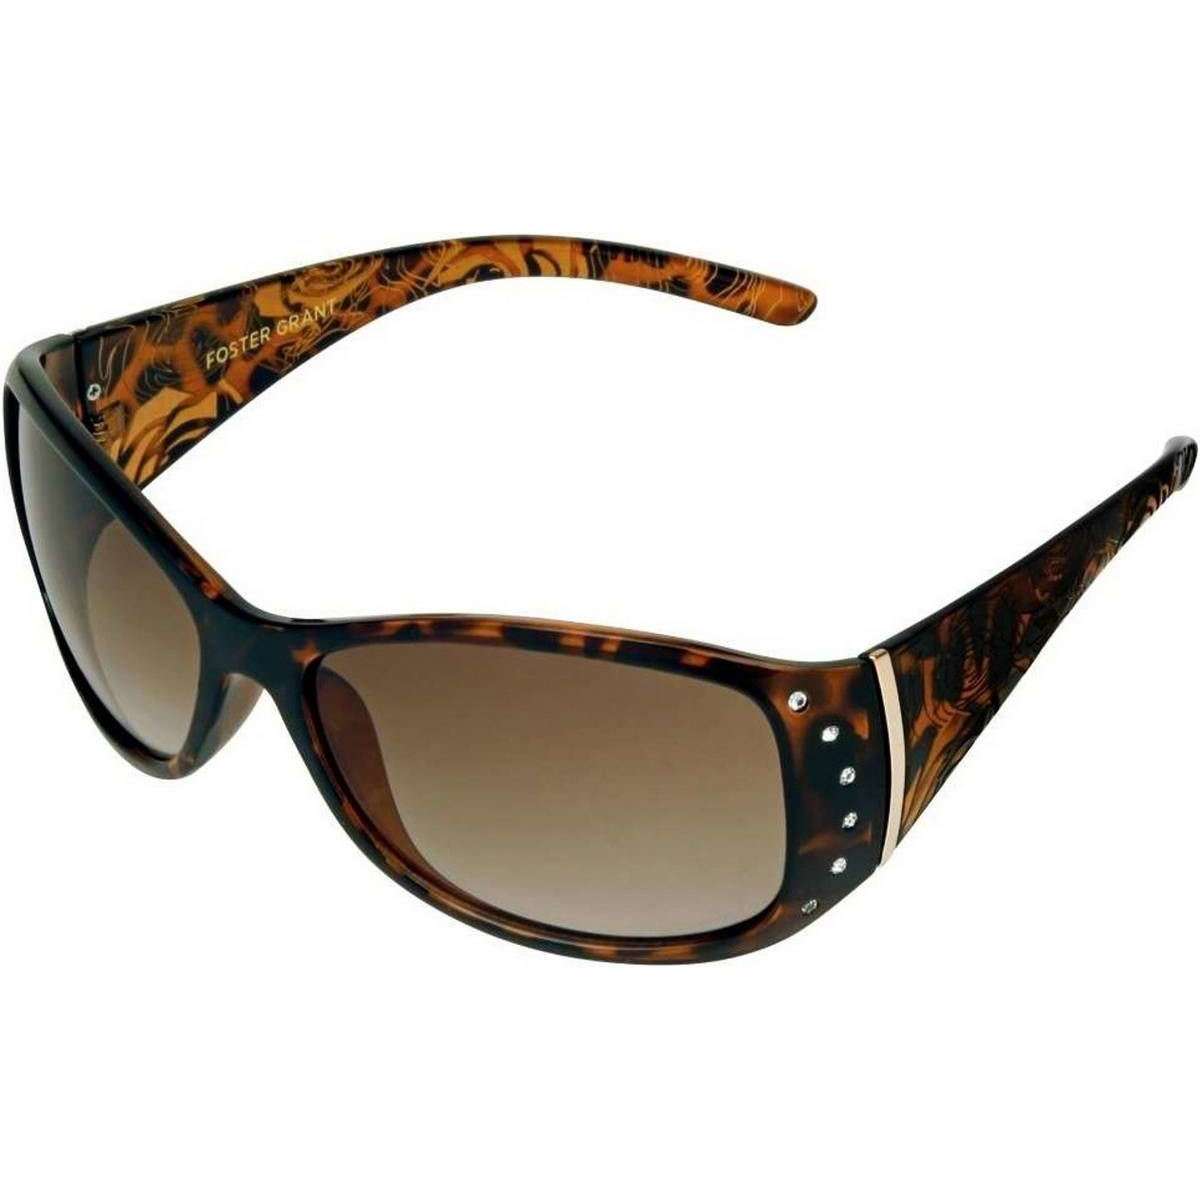 Foster Grant Easy Wrap Tort Sunglasses - Brown/Gold